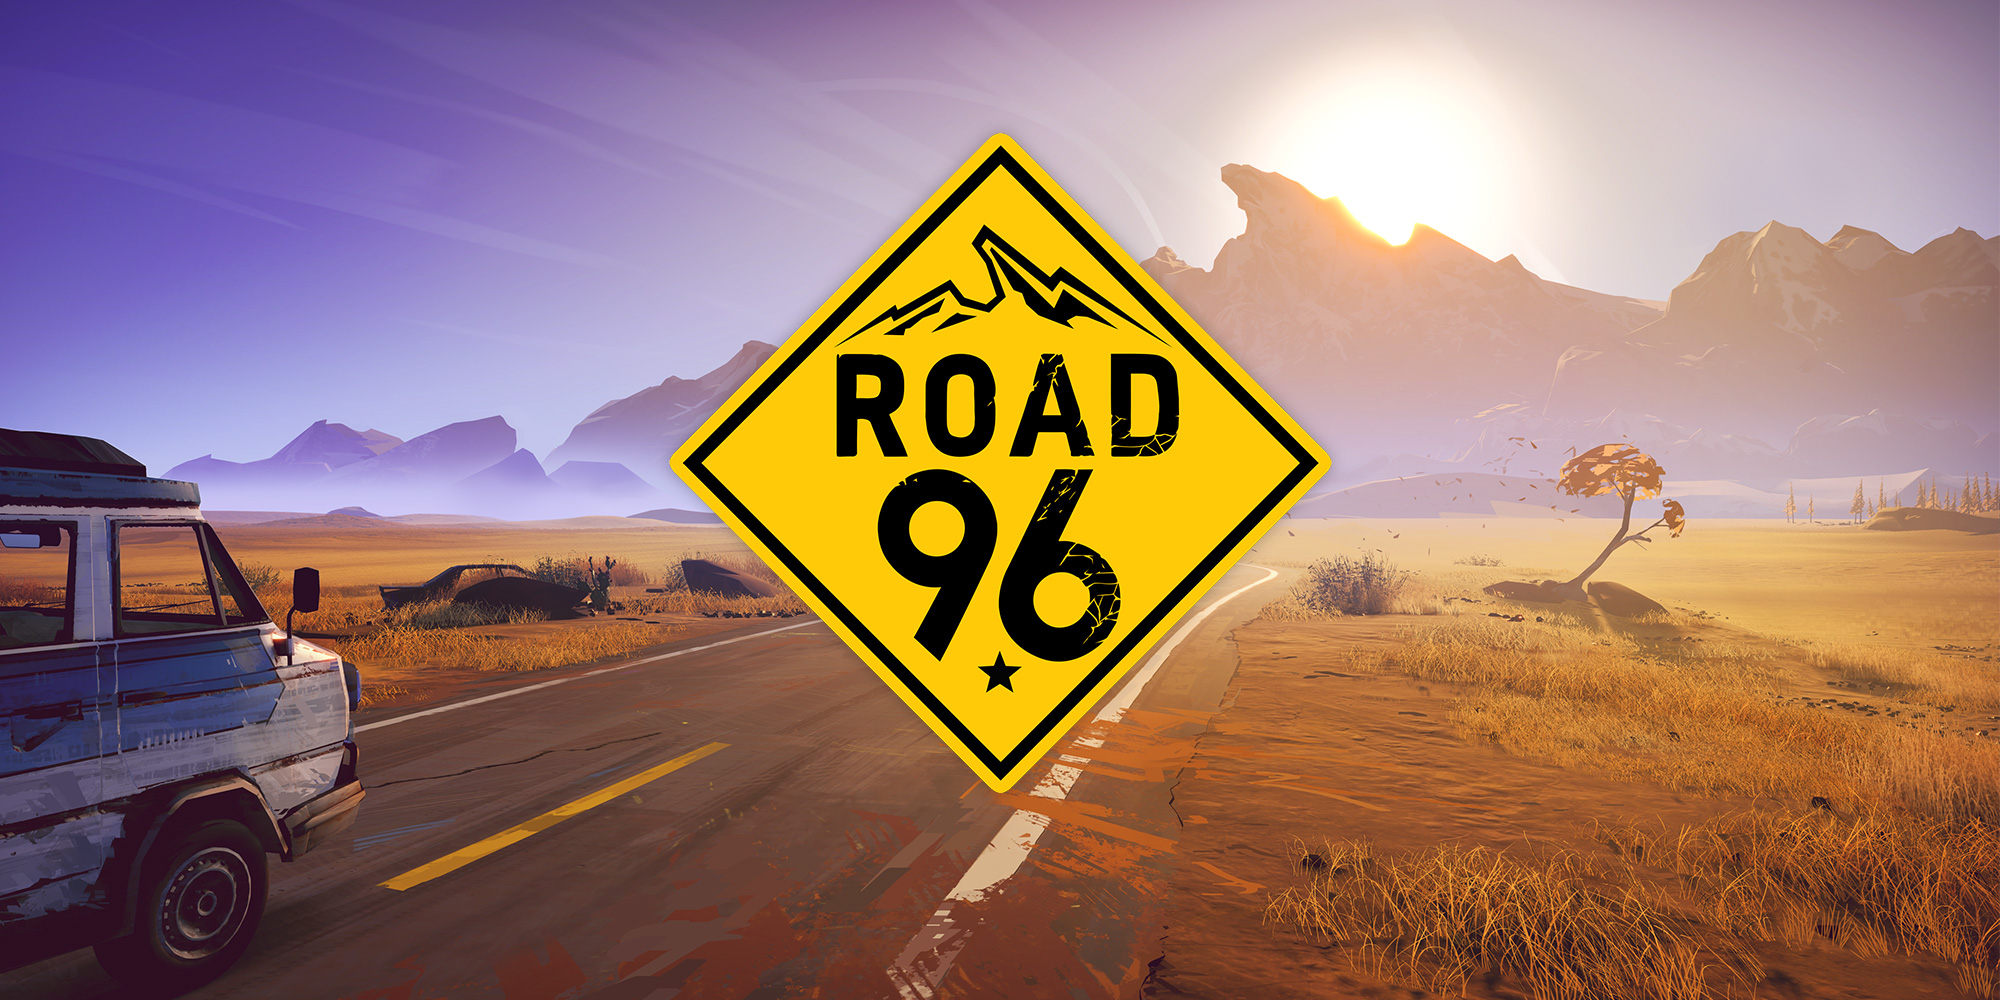 H2x1_NSwitchDS_Road96.jpg